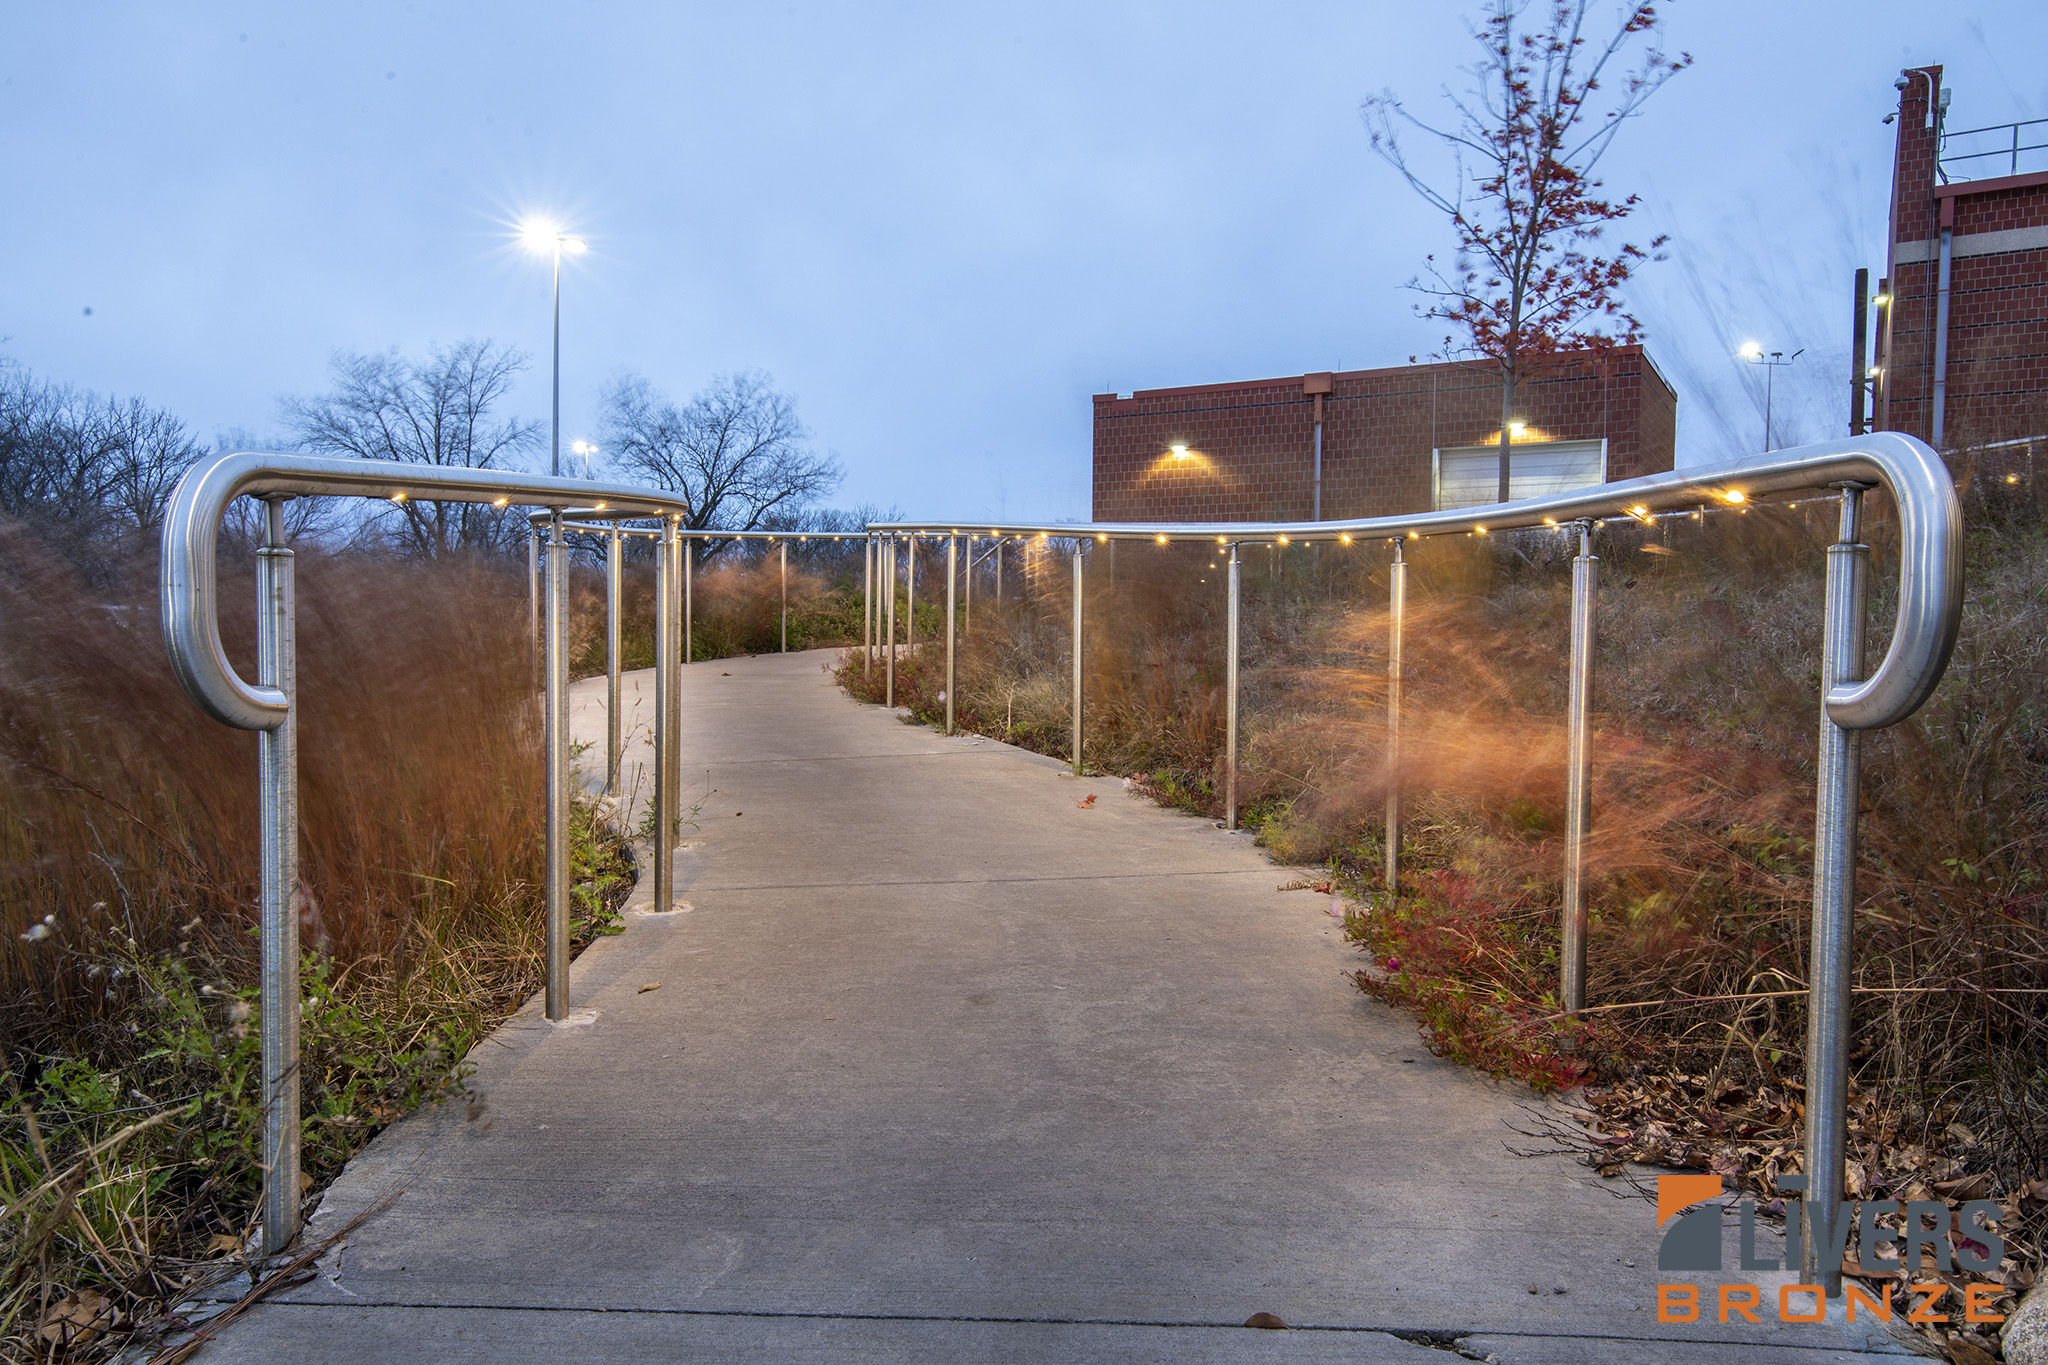 Livers Bronze Illume Puck LED curved railings were installed along the exterior pedestrian ramp at MidAmerican Energy Headquarters, Urbandale, Iowa, and were Made in the USA.